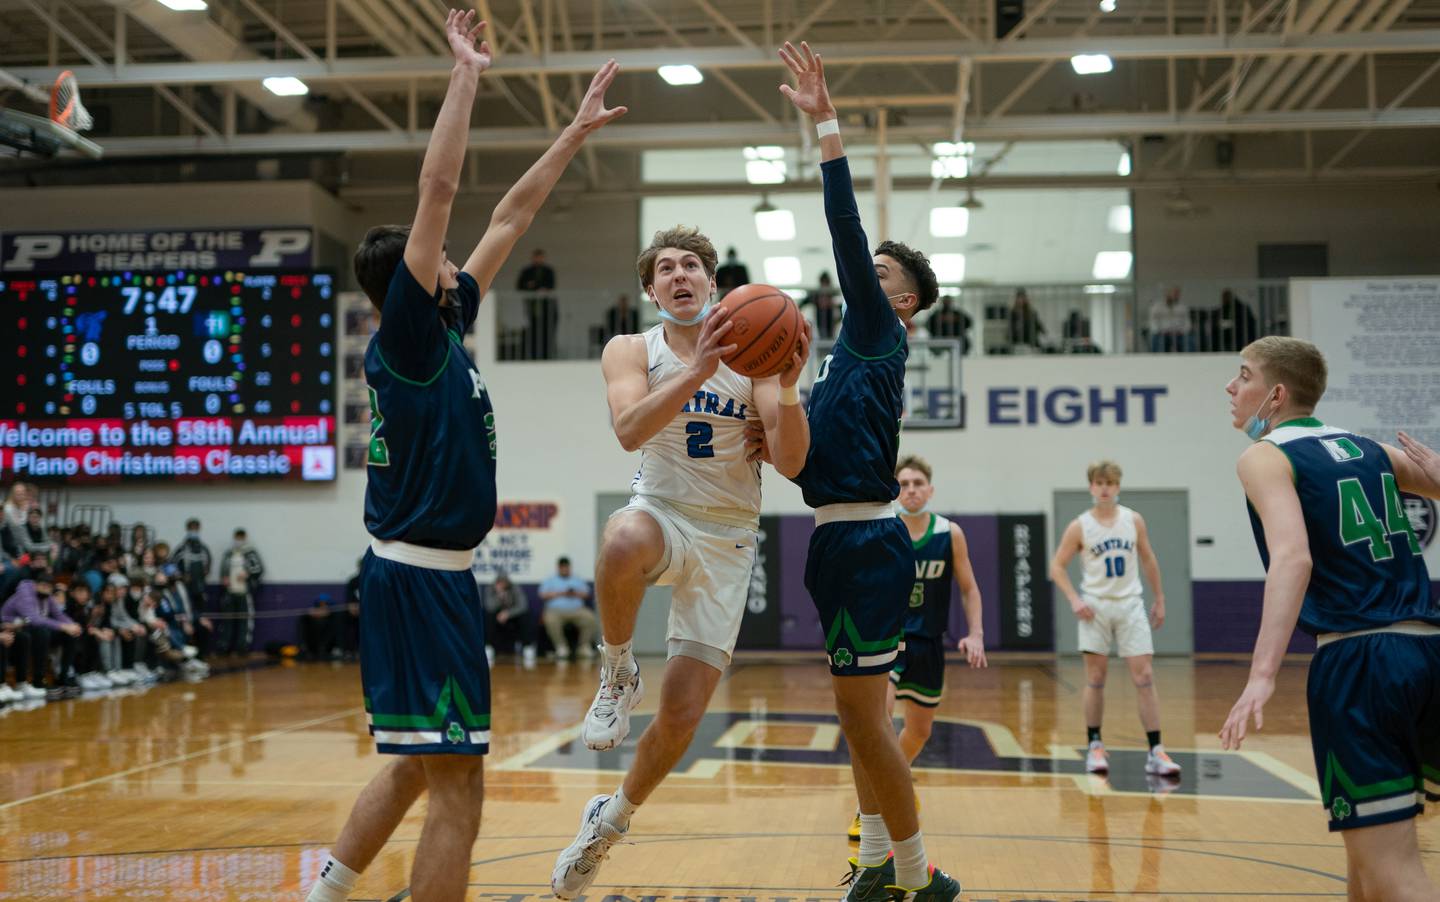 Burlington Central's Gavin Sarvis (2) drives to the basket against Peoria Notre Dame during the Plano Christmas Classic Championship at Plano High School on Thursday, Dec 30, 2021.